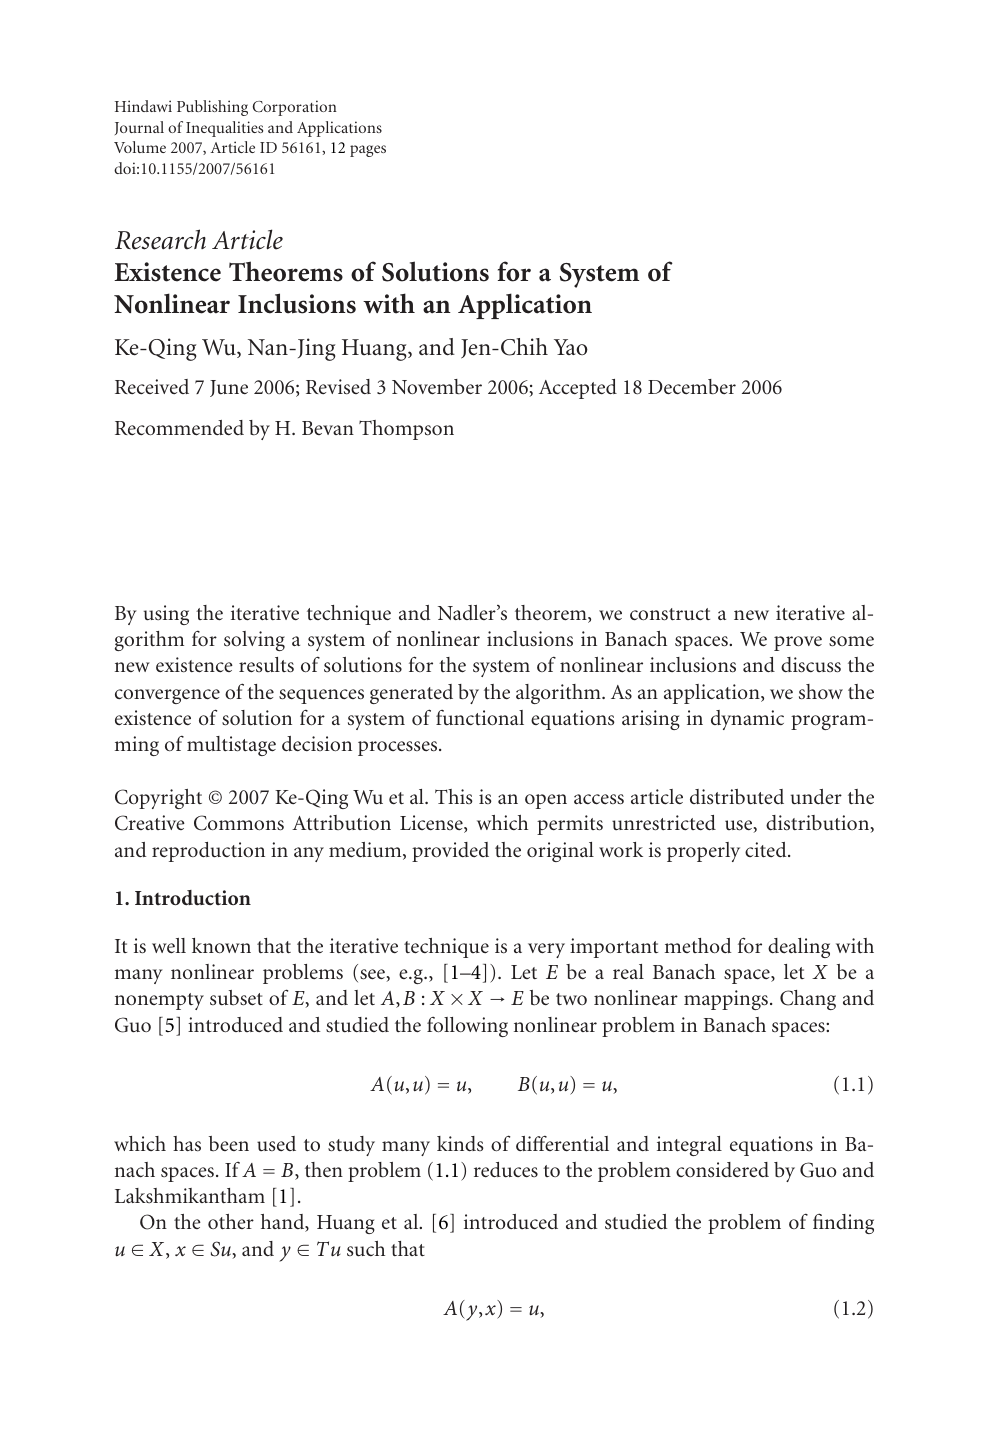 Existence Theorems Of Solutions For A System Of Nonlinear Inclusions With An Application Topic Of Research Paper In Mathematics Download Scholarly Article Pdf And Read For Free On Cyberleninka Open Science